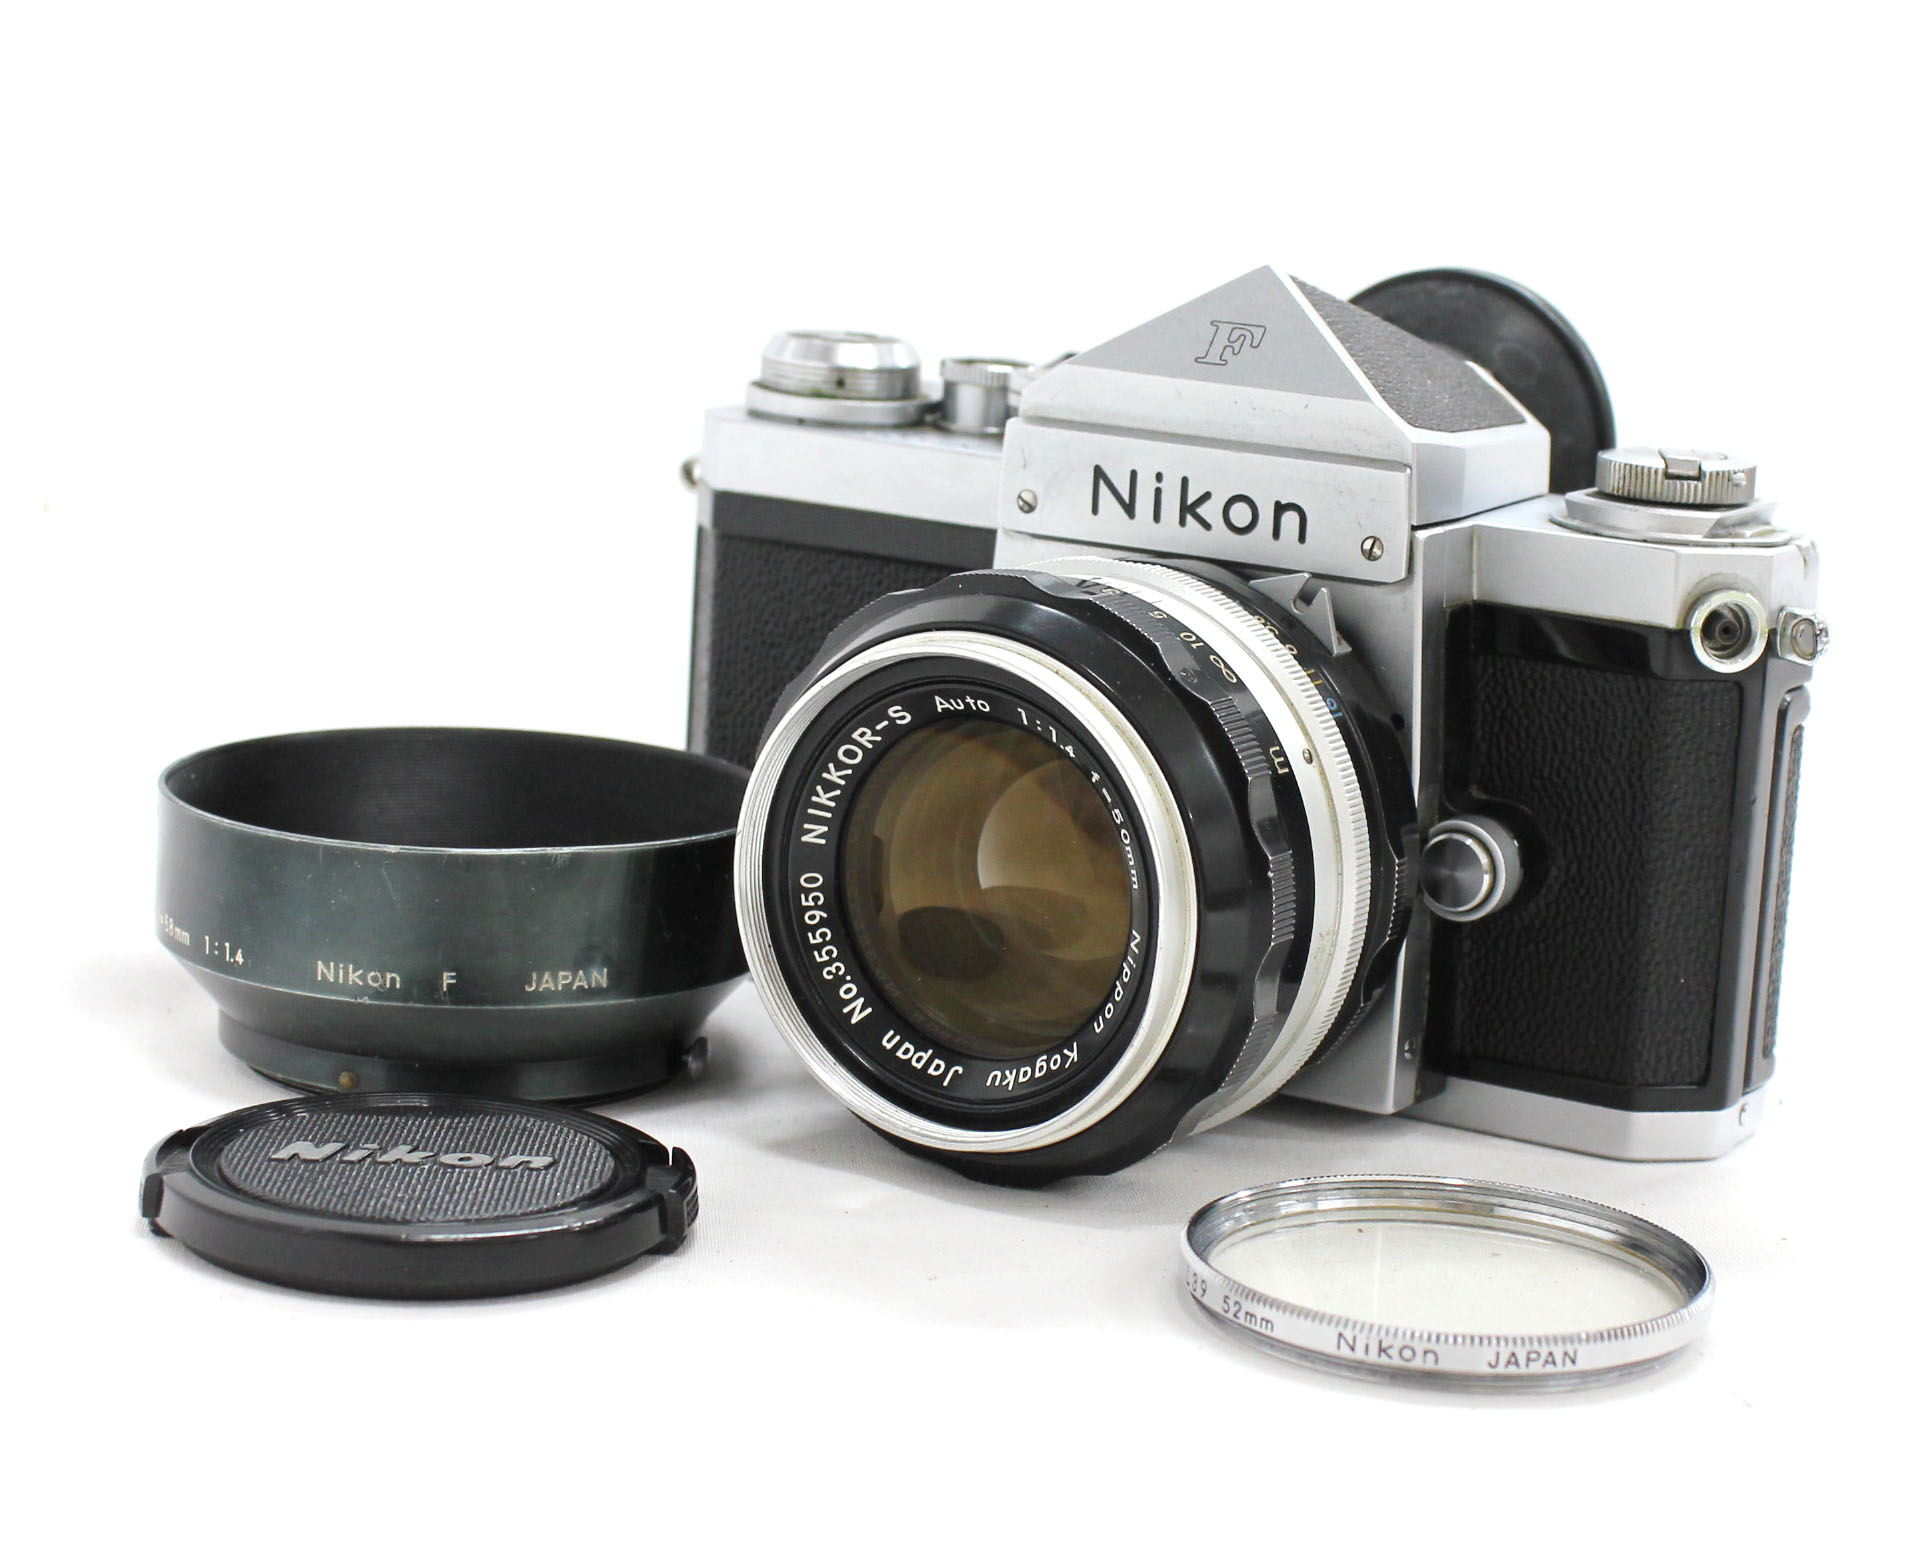 Japan Used Camera Shop | Nikon Apollo New F Eye Level 35mm SLR Film Camera S/N 742* with Nikkor-S 50mm F/1.4 Lens from Japan